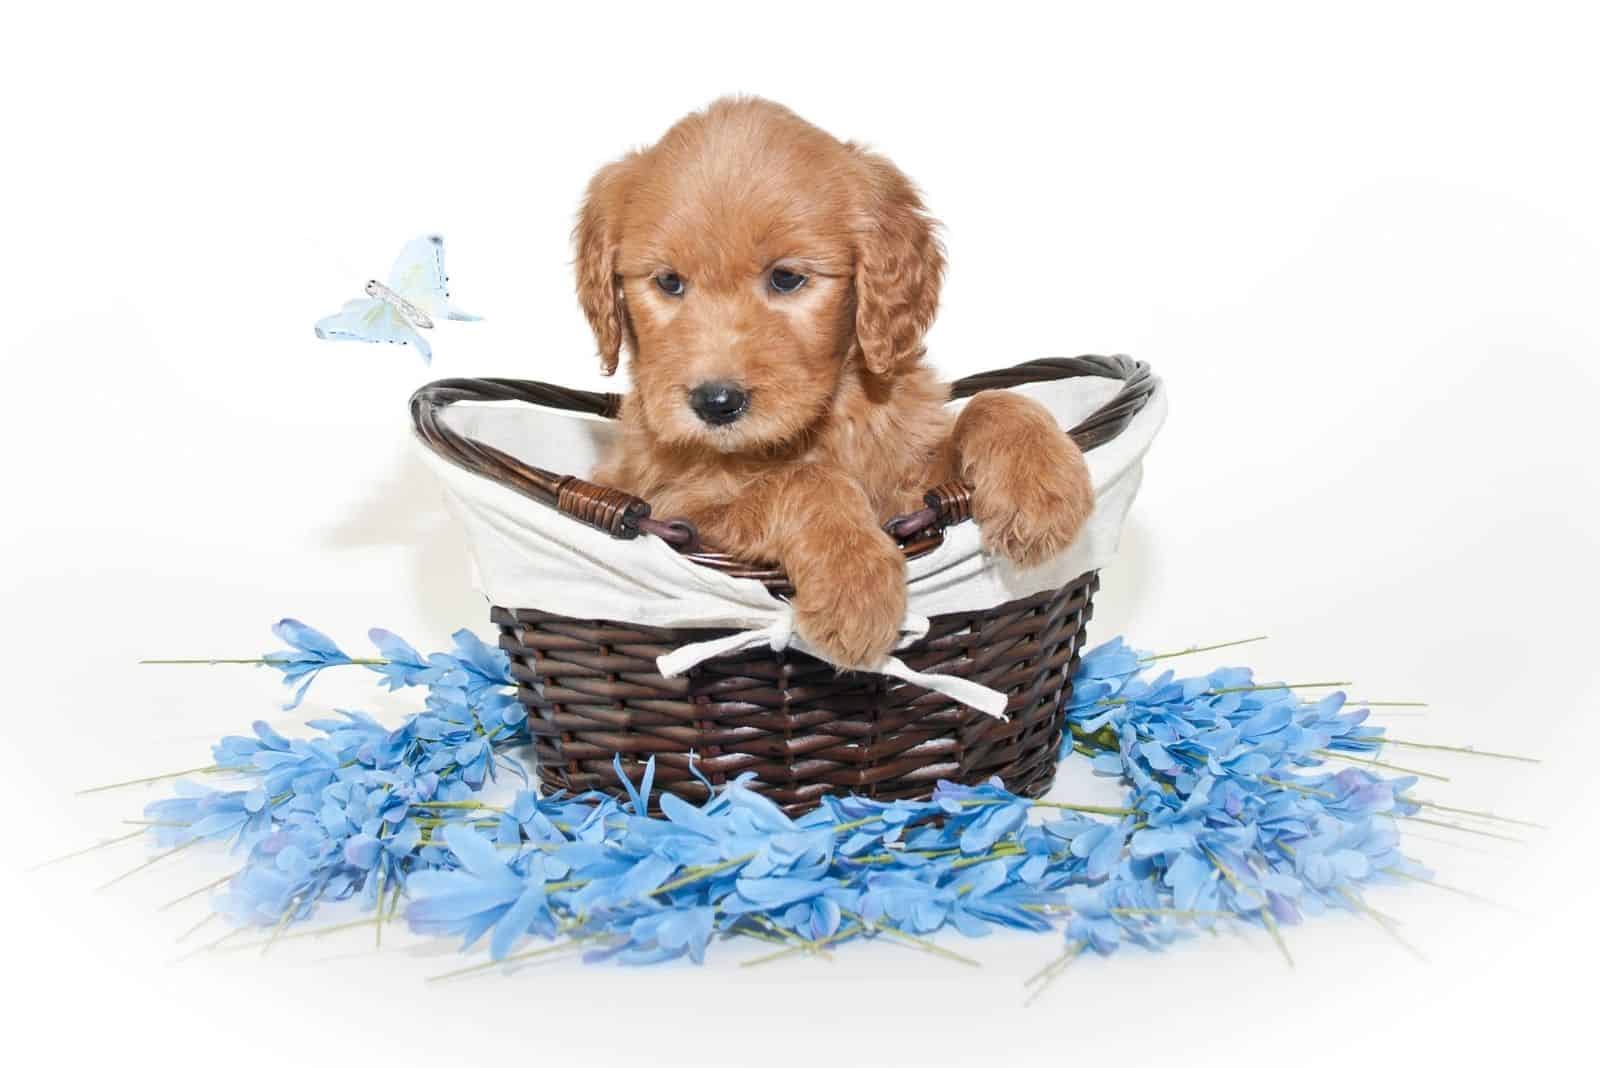 goldendoodle puppy inside a basket with blue flowers around in white background